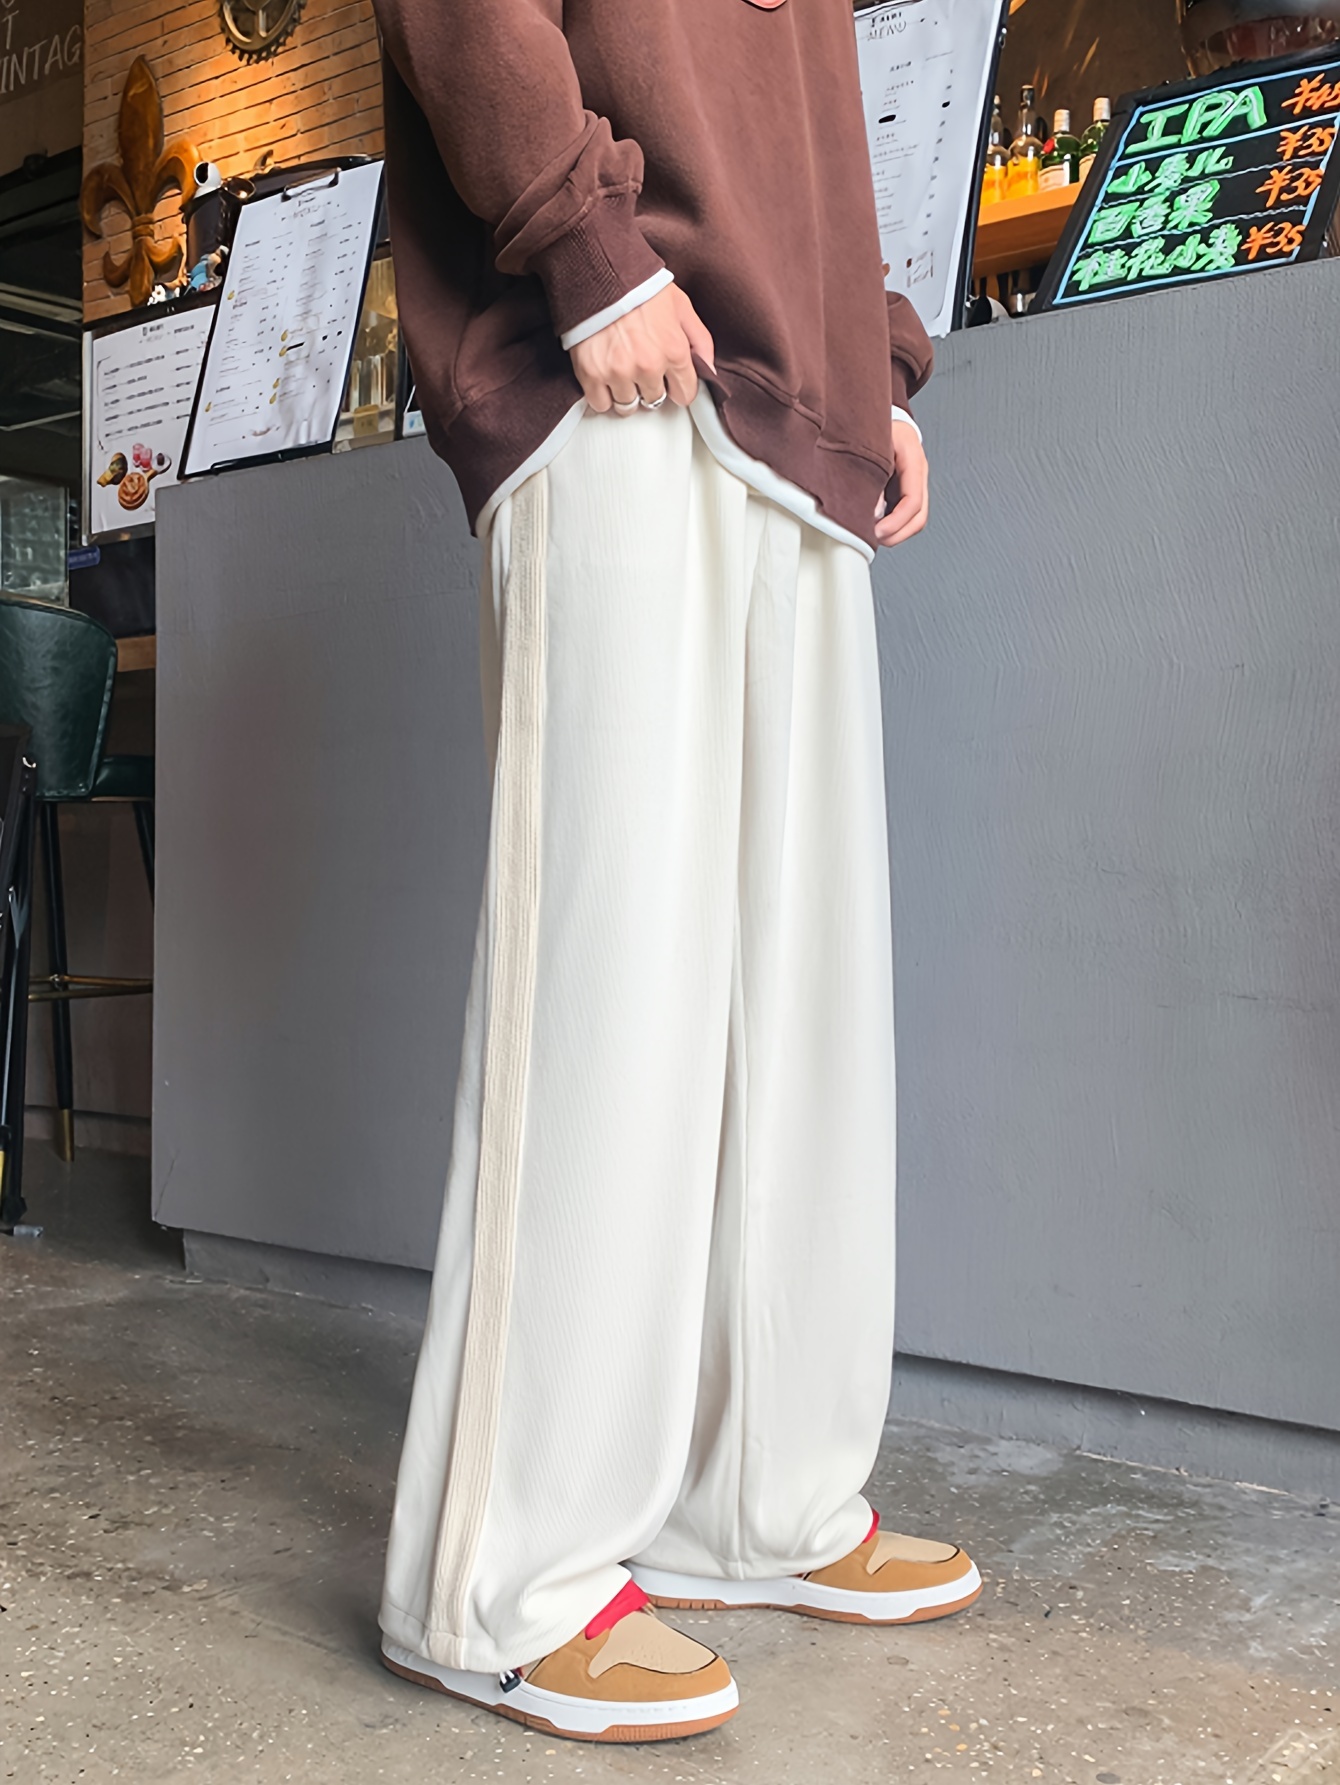 Loose fit pant  Casual pants style, Streetwear outfits, Pants